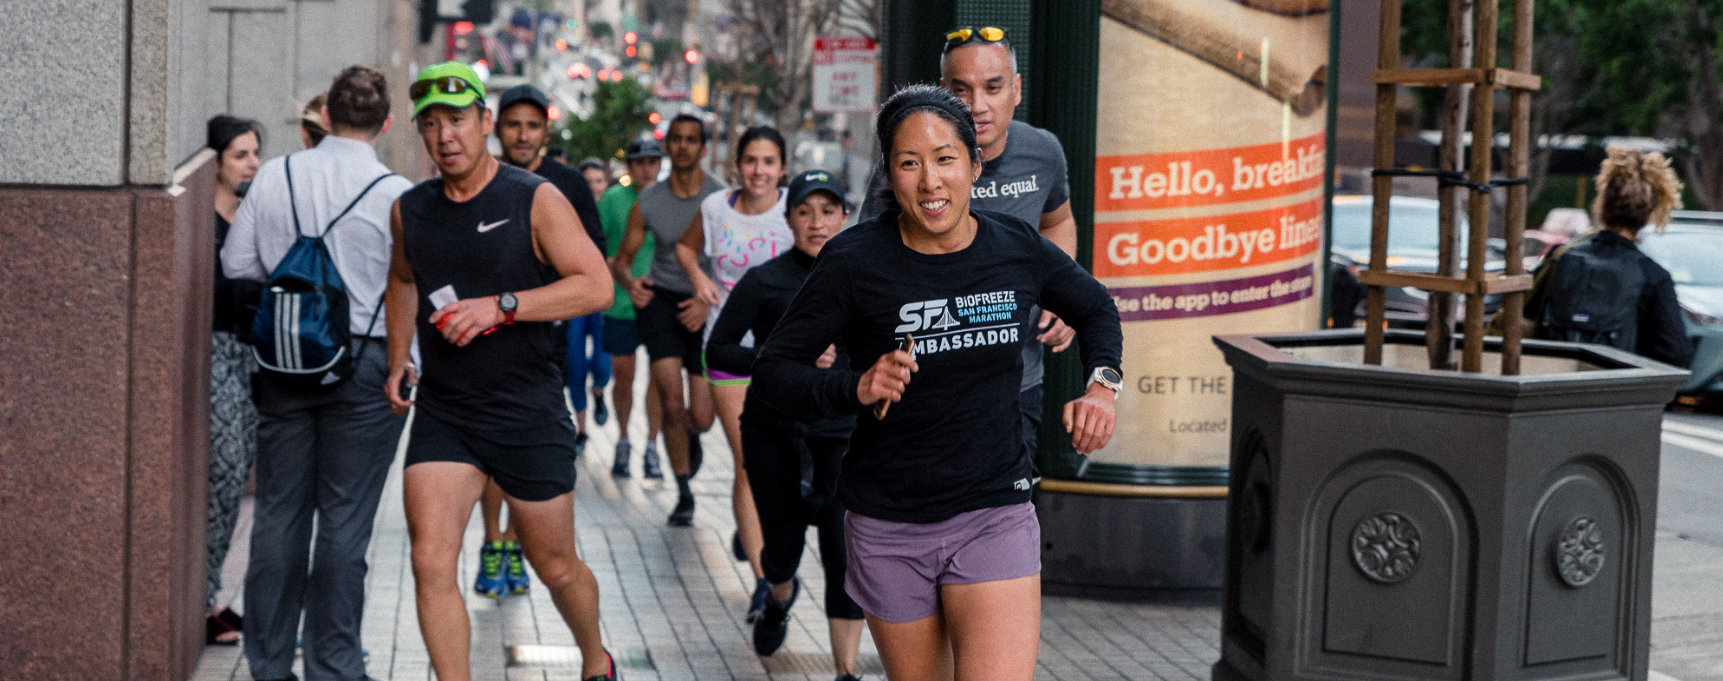 6 Best Things About Running With Your Friends | SF Marathon